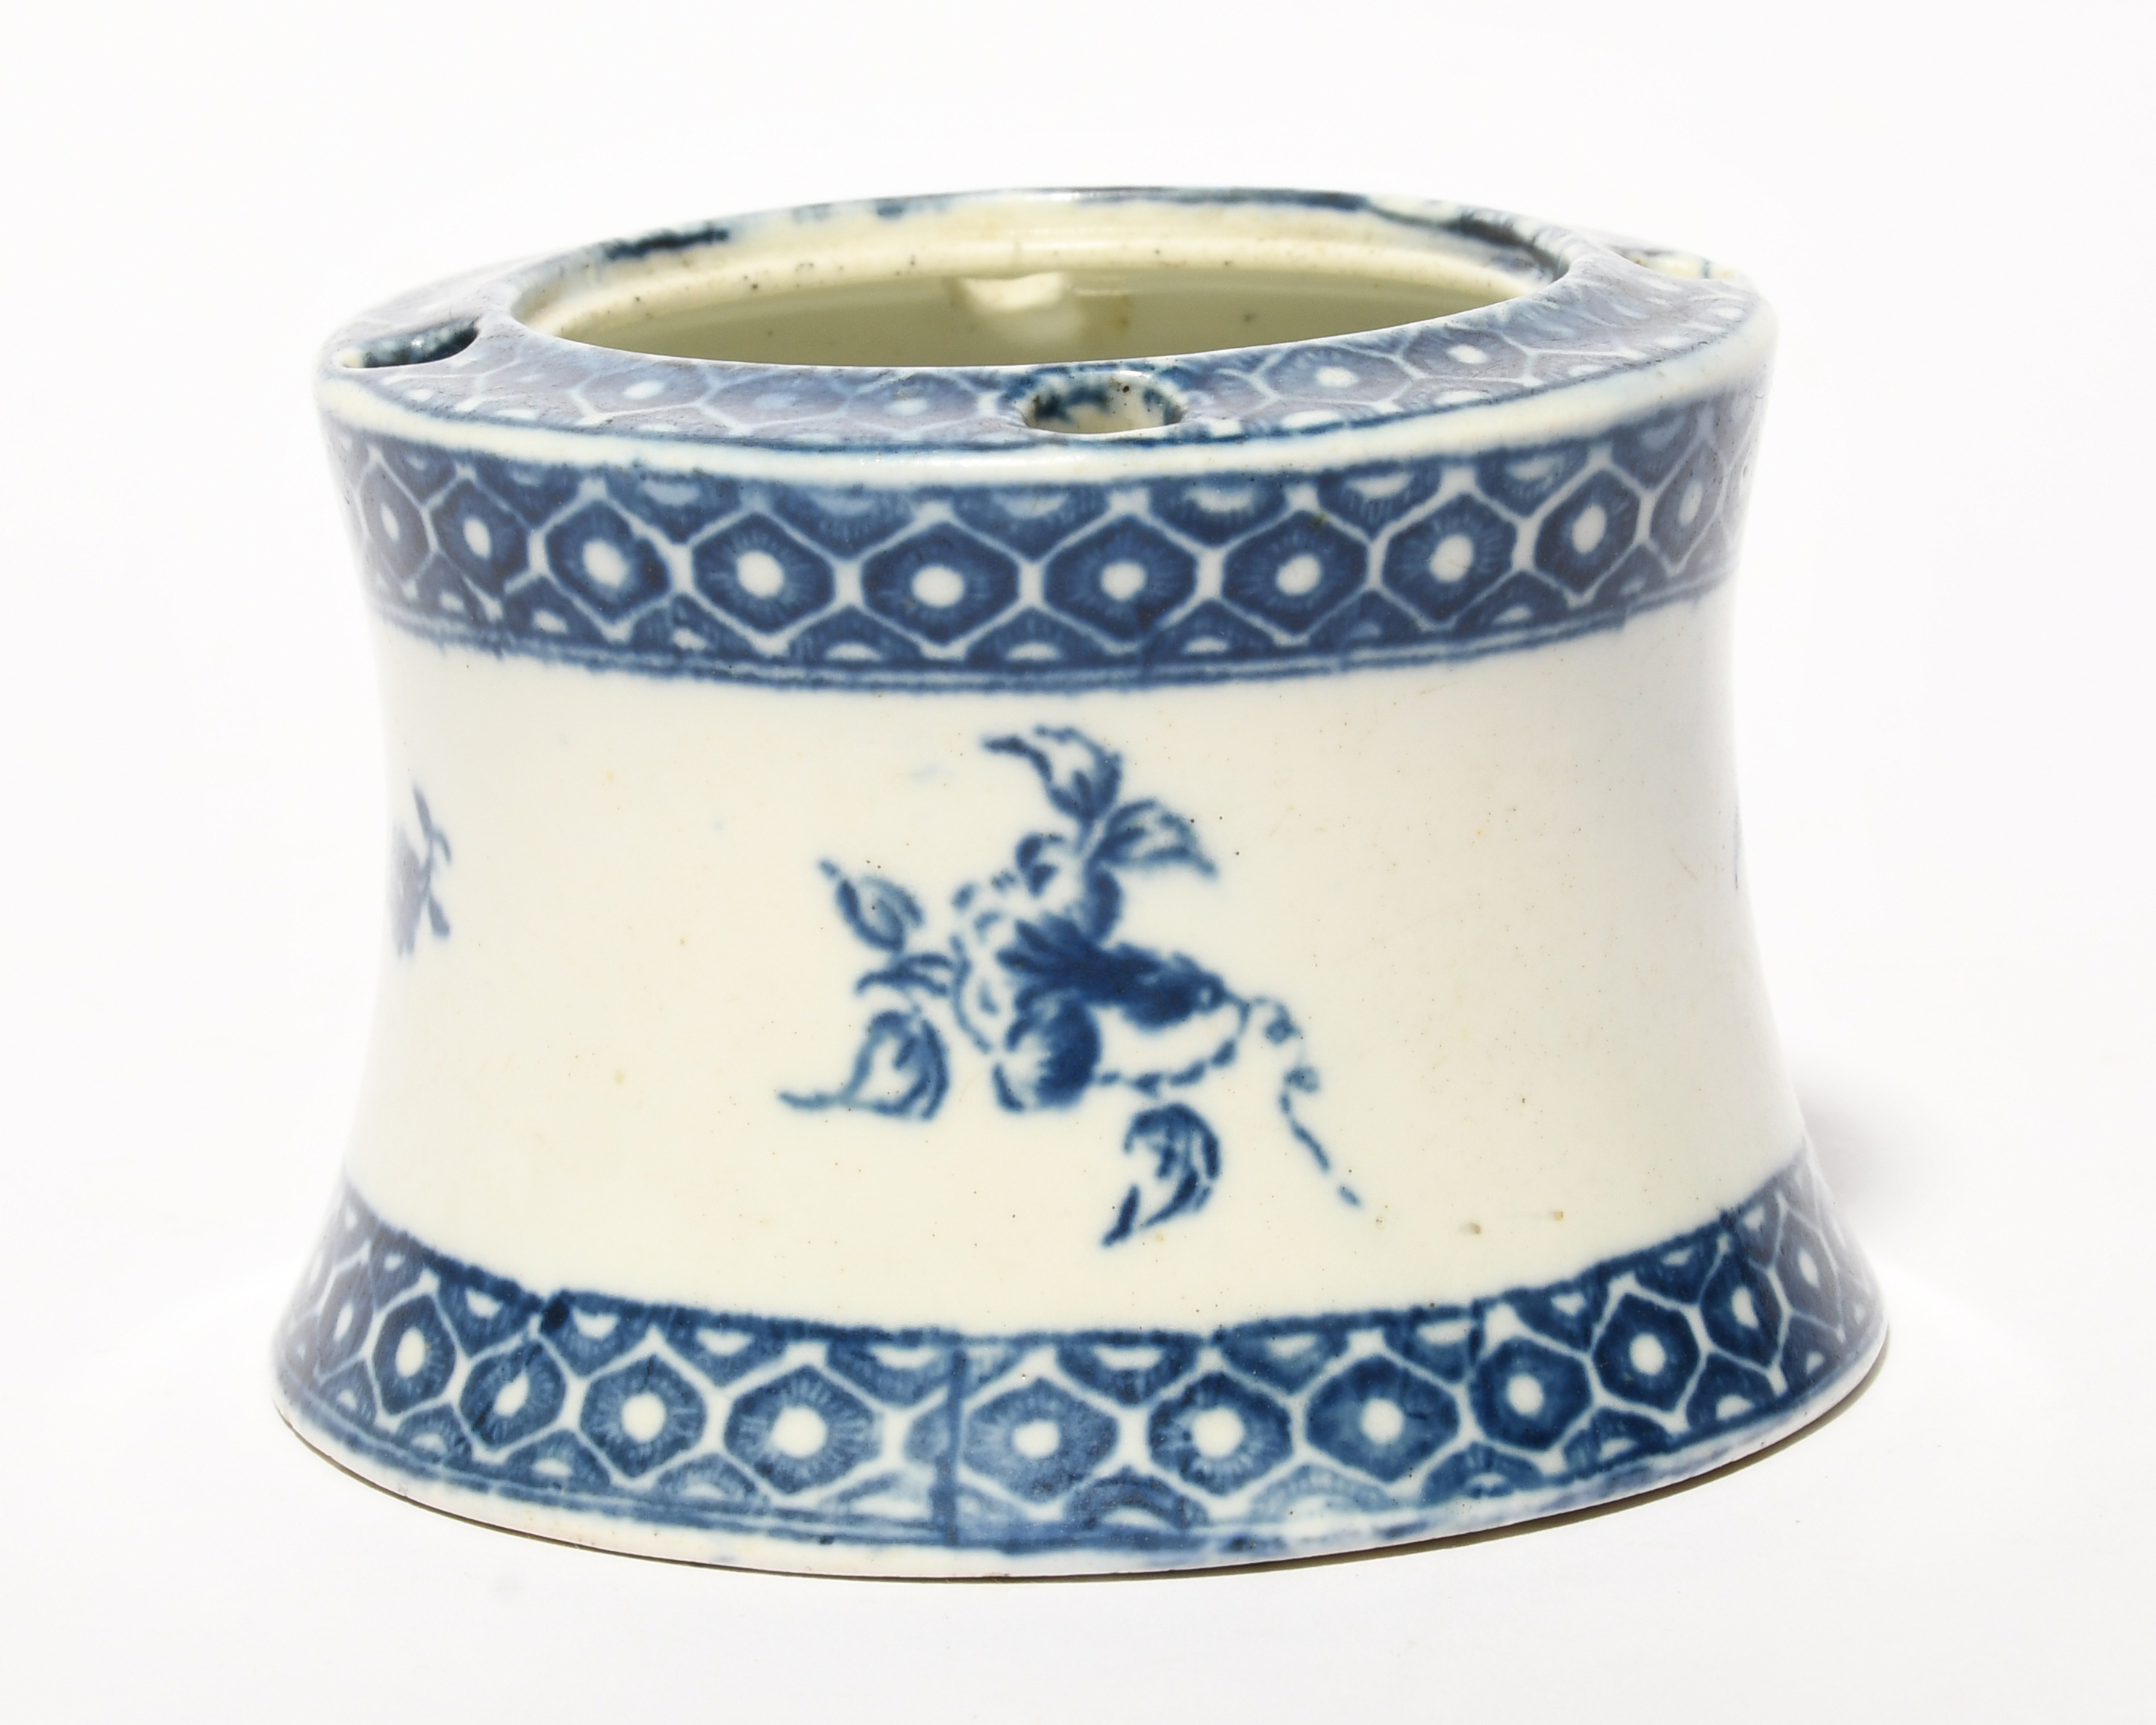 A rare Caughley blue and white inkwell, c.1780, of capstan shape, printed with small flower sprigs - Image 2 of 2